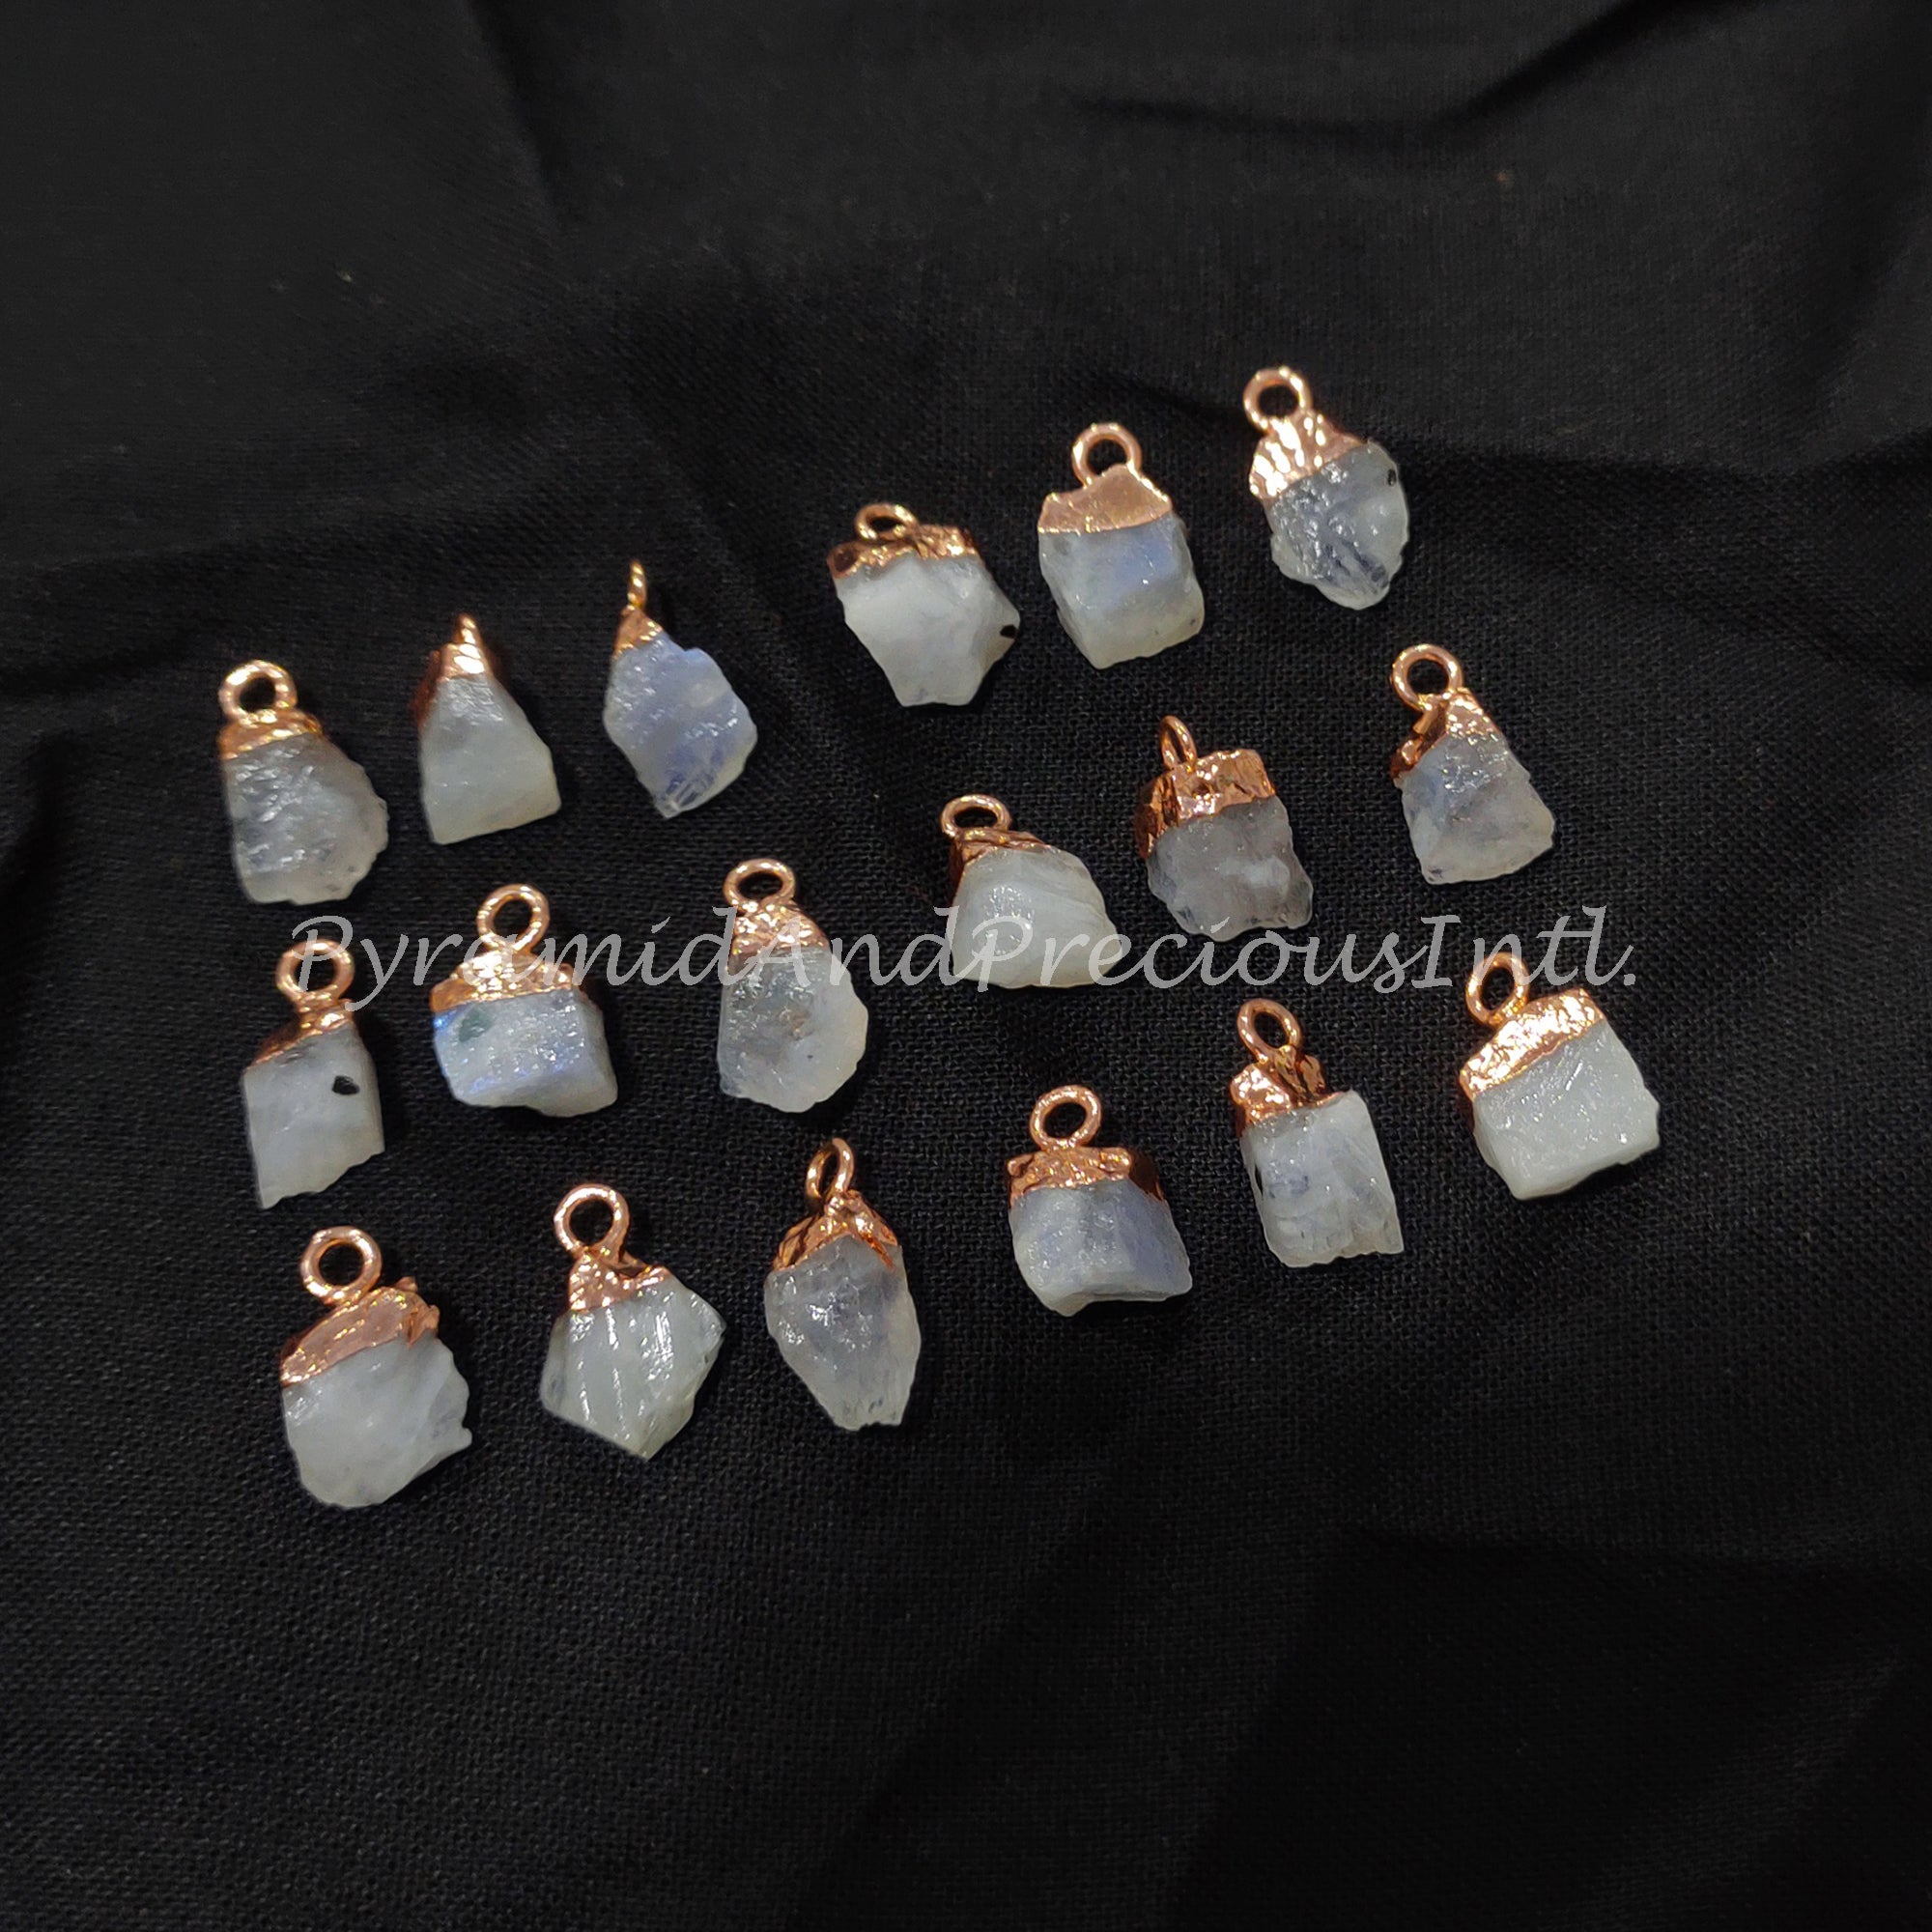 Big Sale On Raw Moonstone Electroplated Pendant Connectors, Gemstone Connectors, Copper Connectors, Sold By Piece